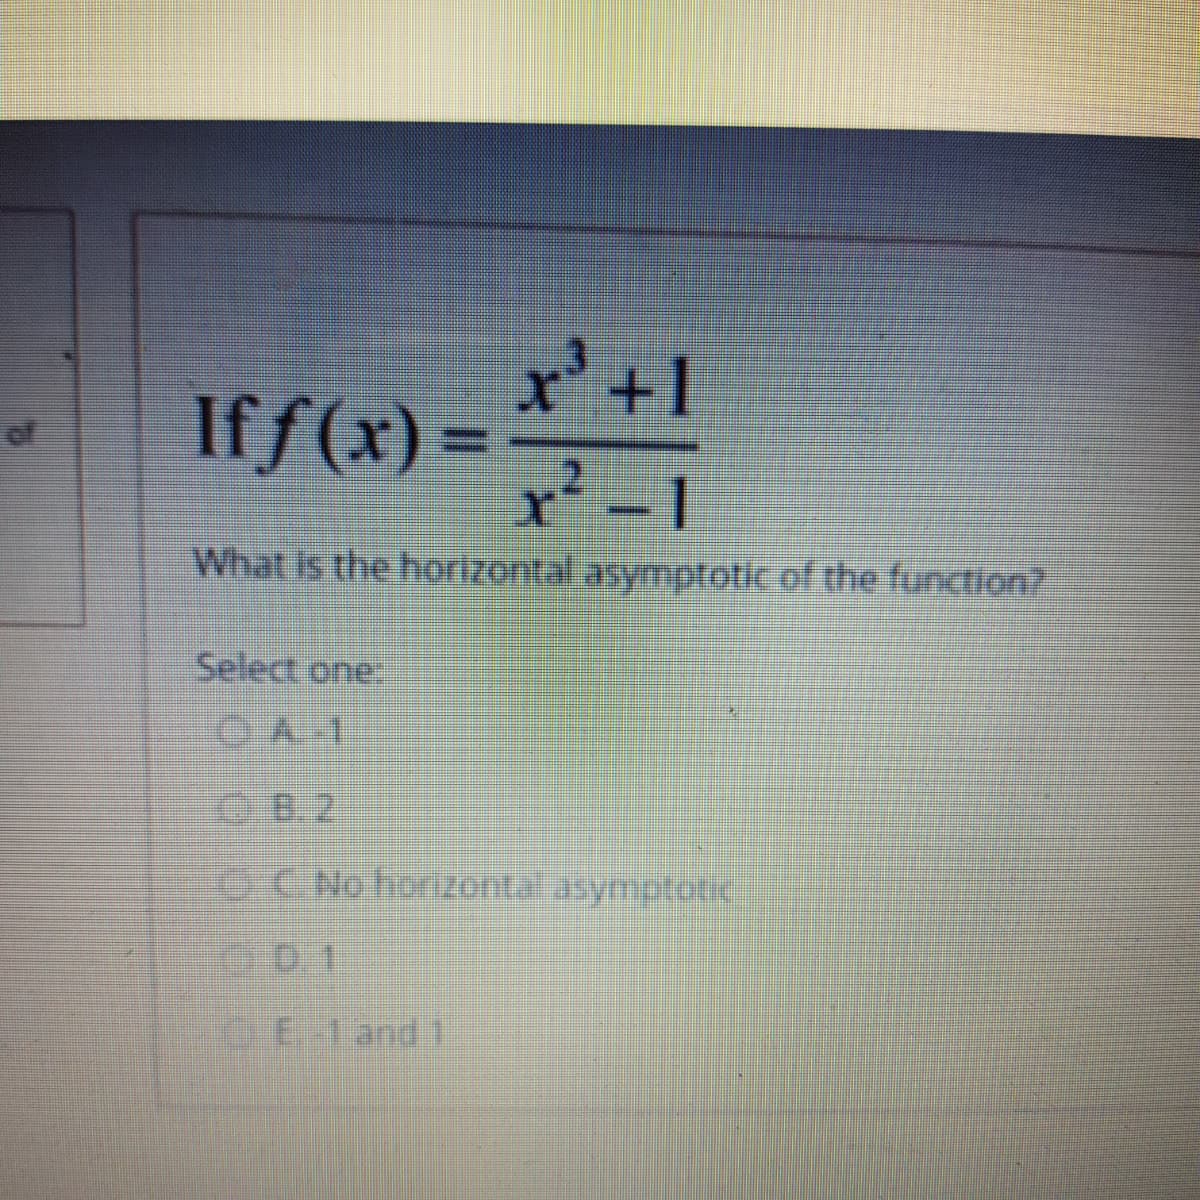 Iff(x) =
- 1
What is the horizontal asymptotic of the function?
Select one
0.0.2
OC Nohorizontal asymptotic
0.1
DEland 1
